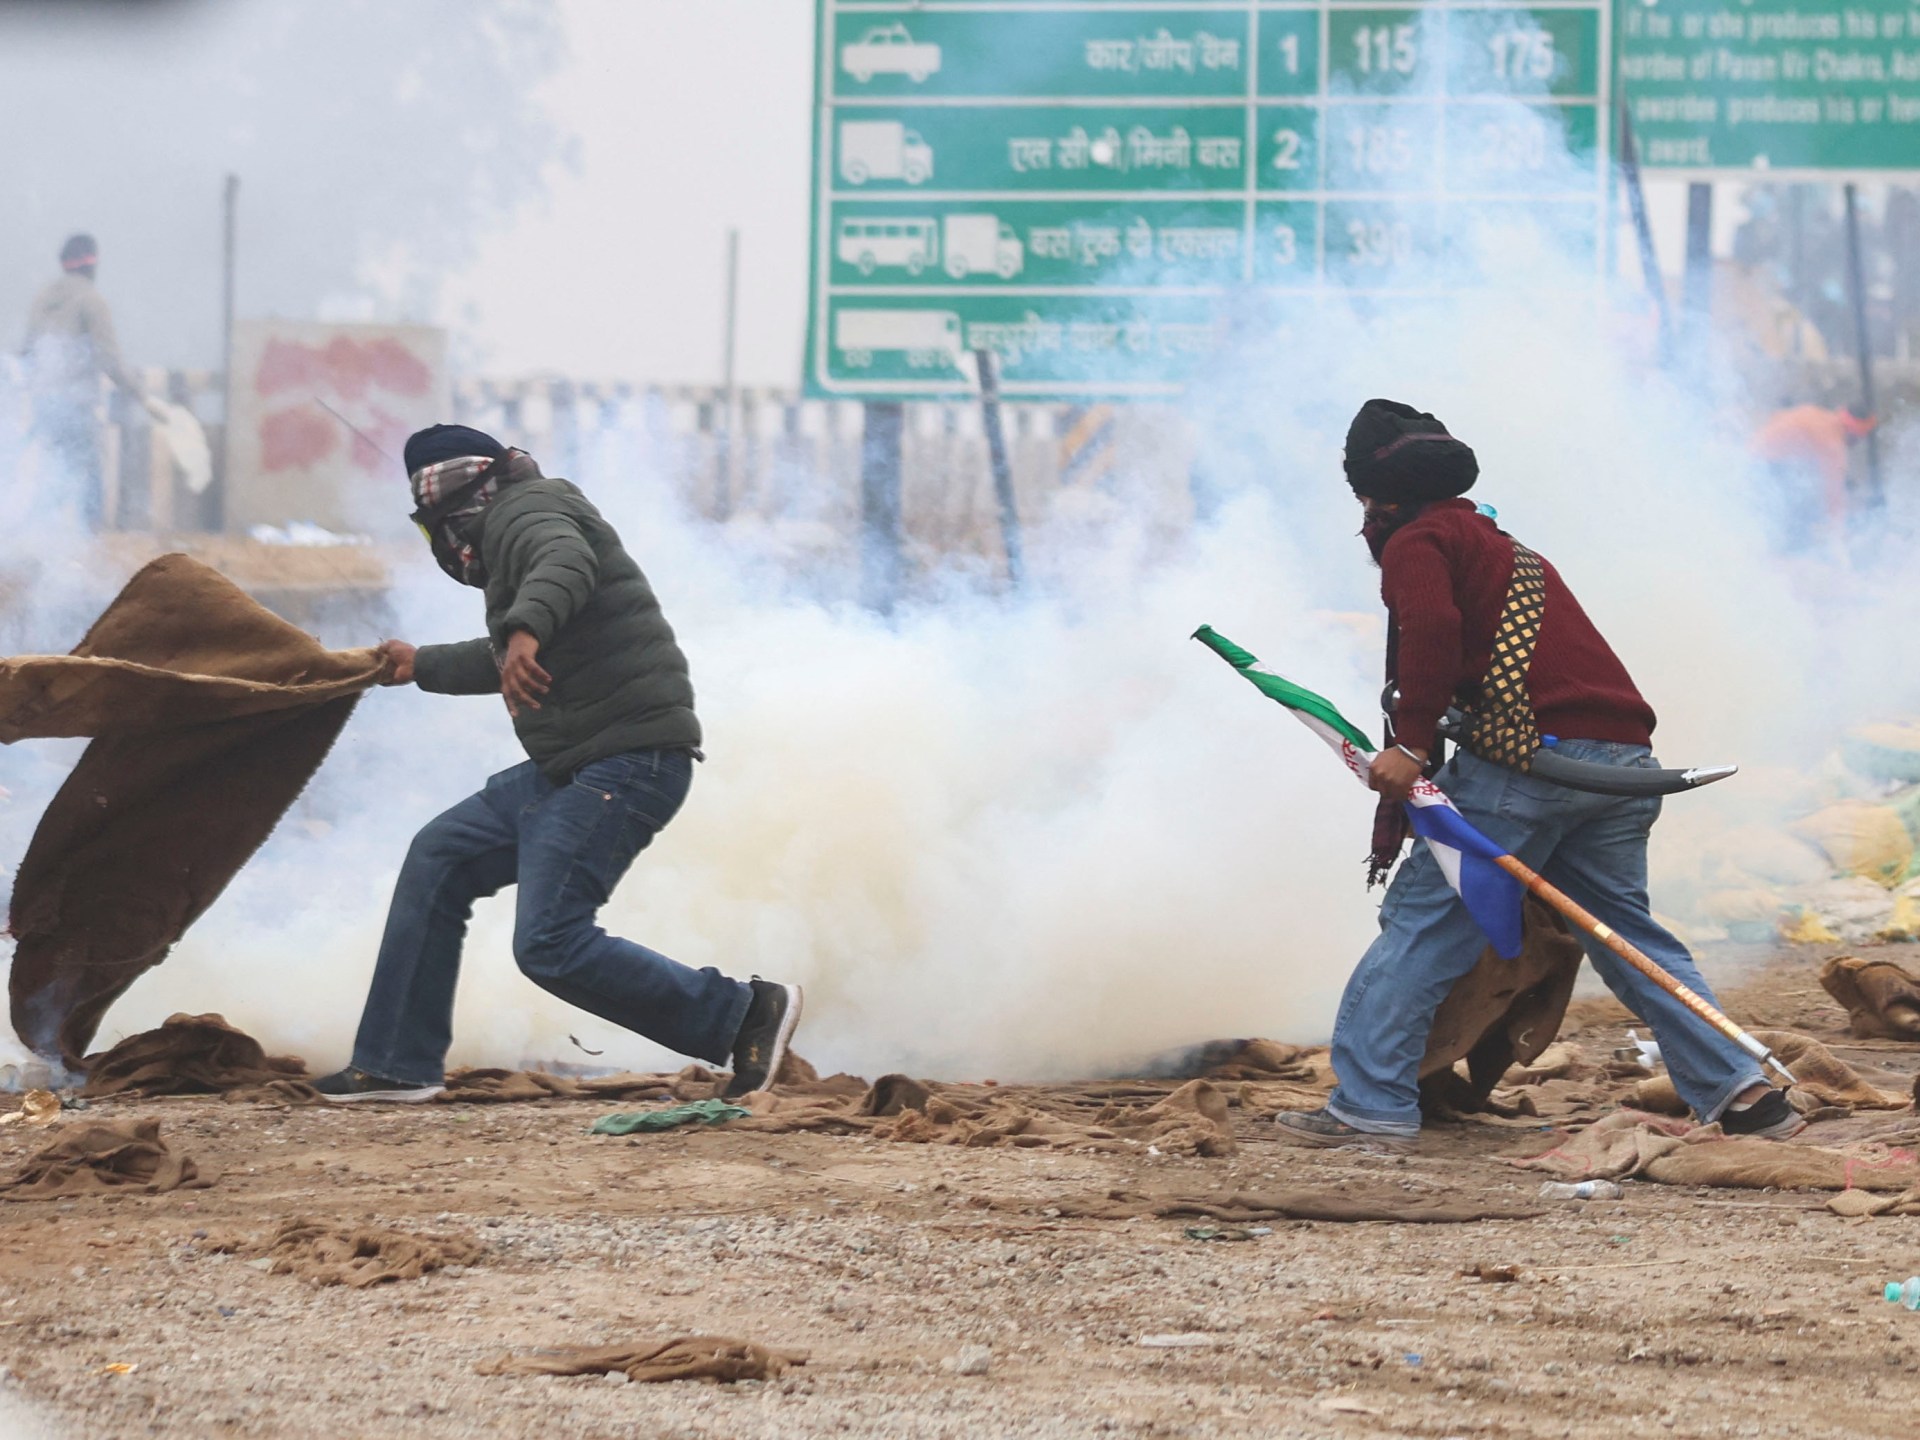 Police fire tear gas at protesting Indian farmers marching to New Delhi | Protests News